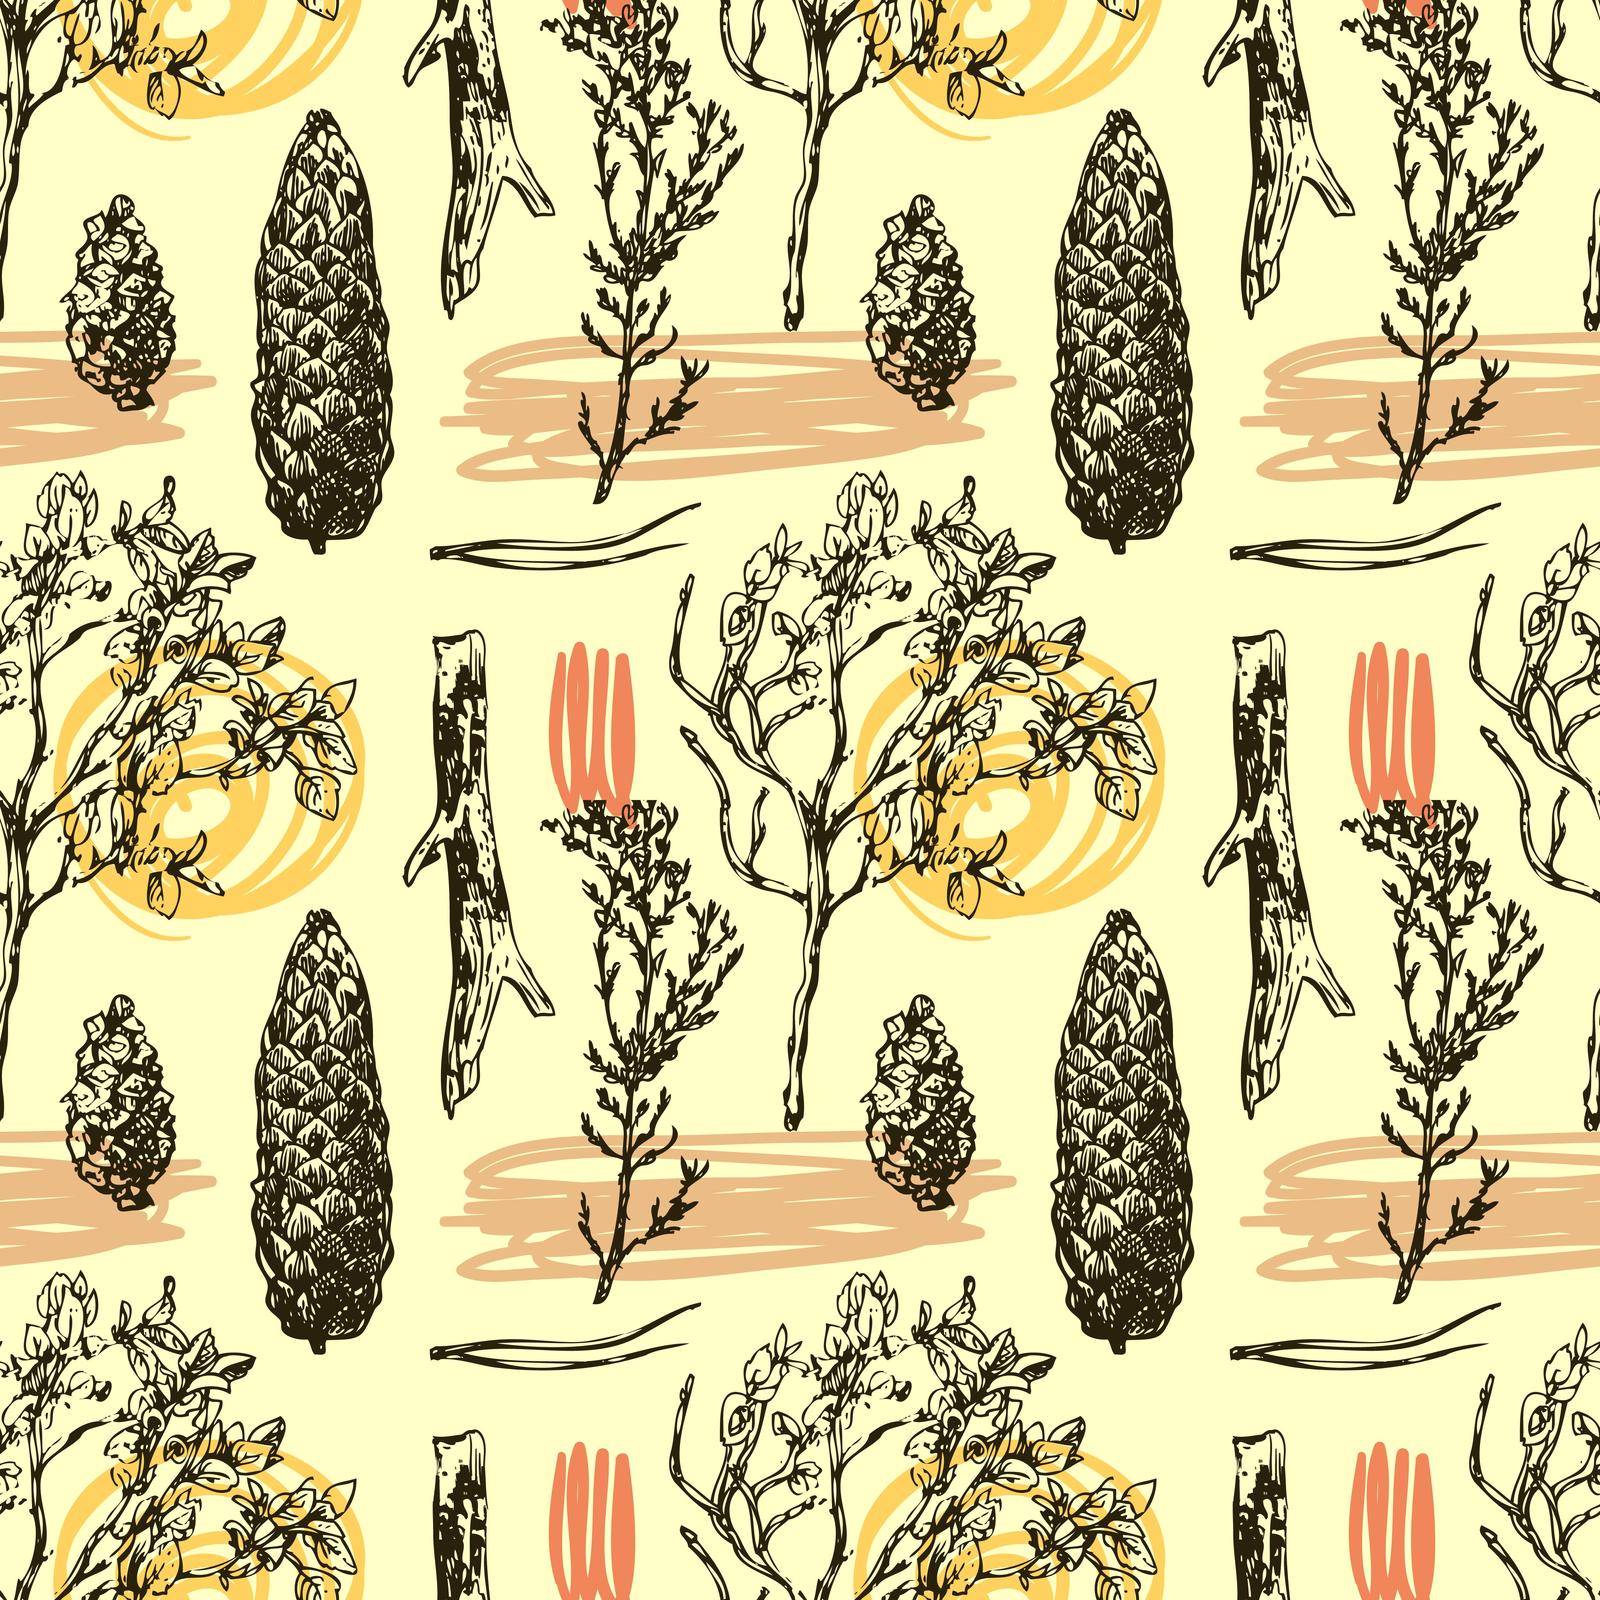 Hand drawn vector seamless pattern with wildflowers and cone. Decorative floral illustration. Sketch style. Us for skrapbuking, tissue, textile, cloth, fabric, web material